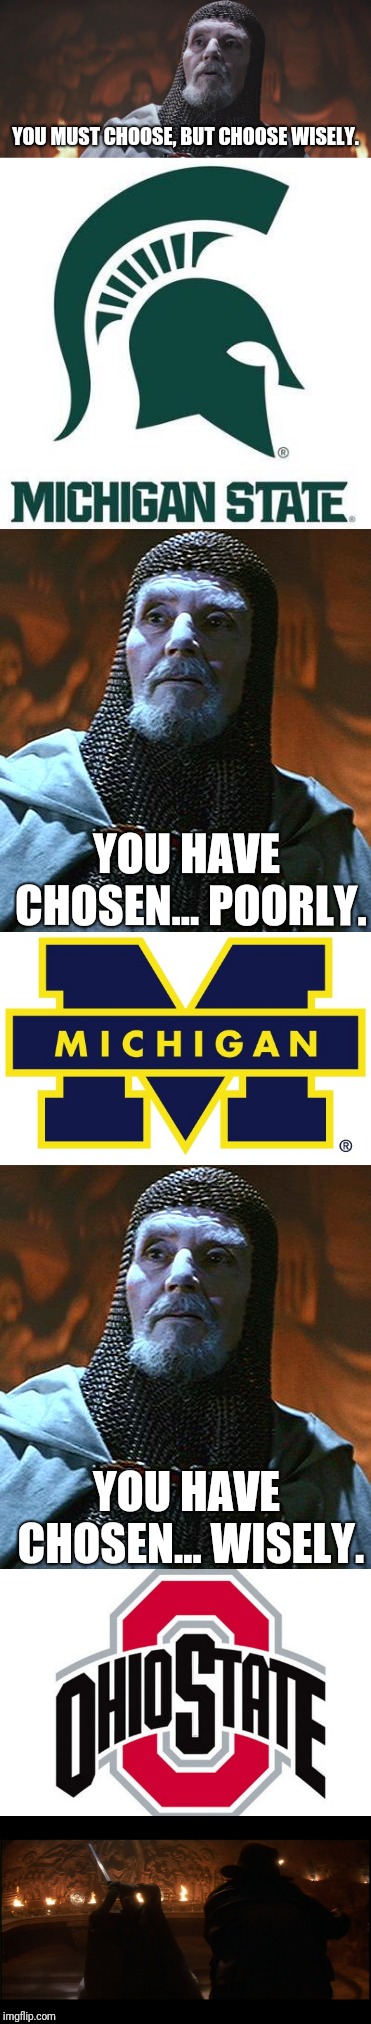 University of Michigan fans (like me) be like... | YOU MUST CHOOSE, BUT CHOOSE WISELY. YOU HAVE CHOSEN... POORLY. YOU HAVE CHOSEN... WISELY. | image tagged in x be like,memes,university of michigan,michigan state,ohio state university,fans | made w/ Imgflip meme maker